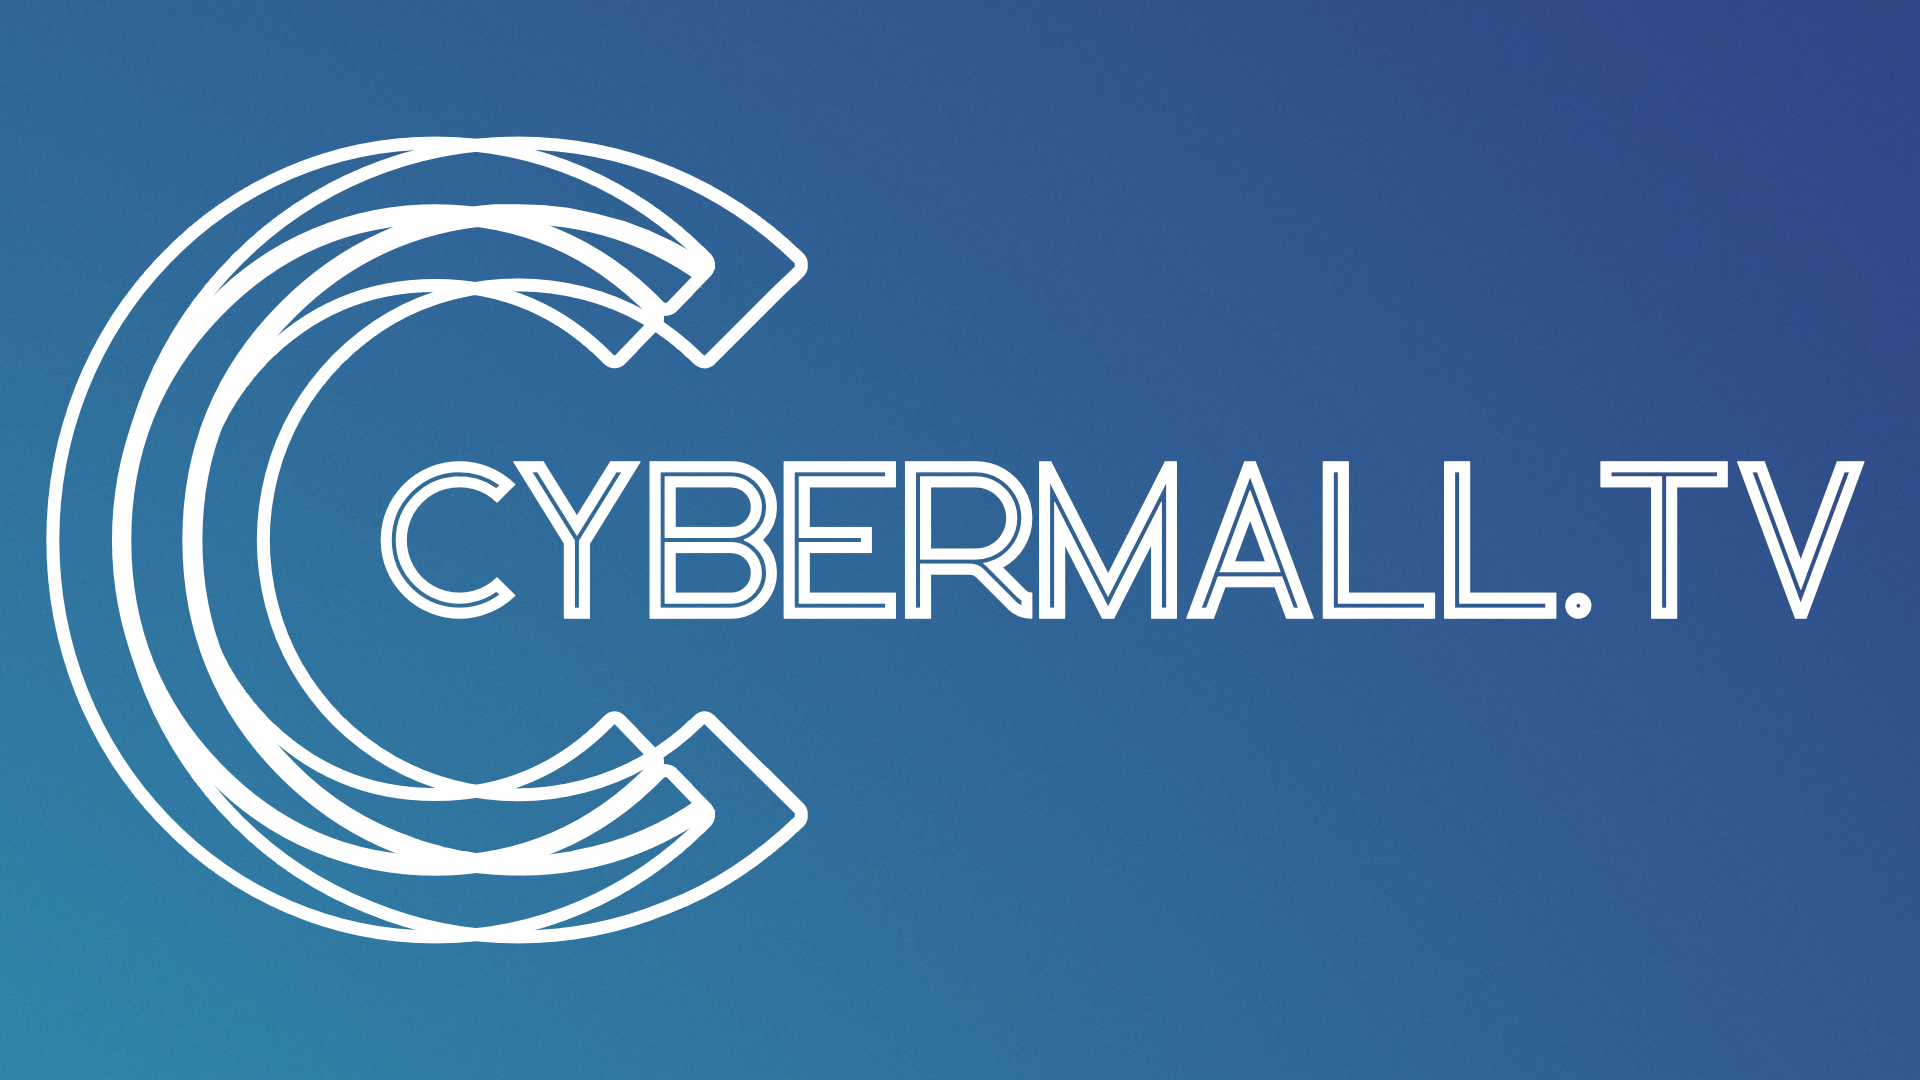 The word "Cybermall.TV" with white letters on a blue background.